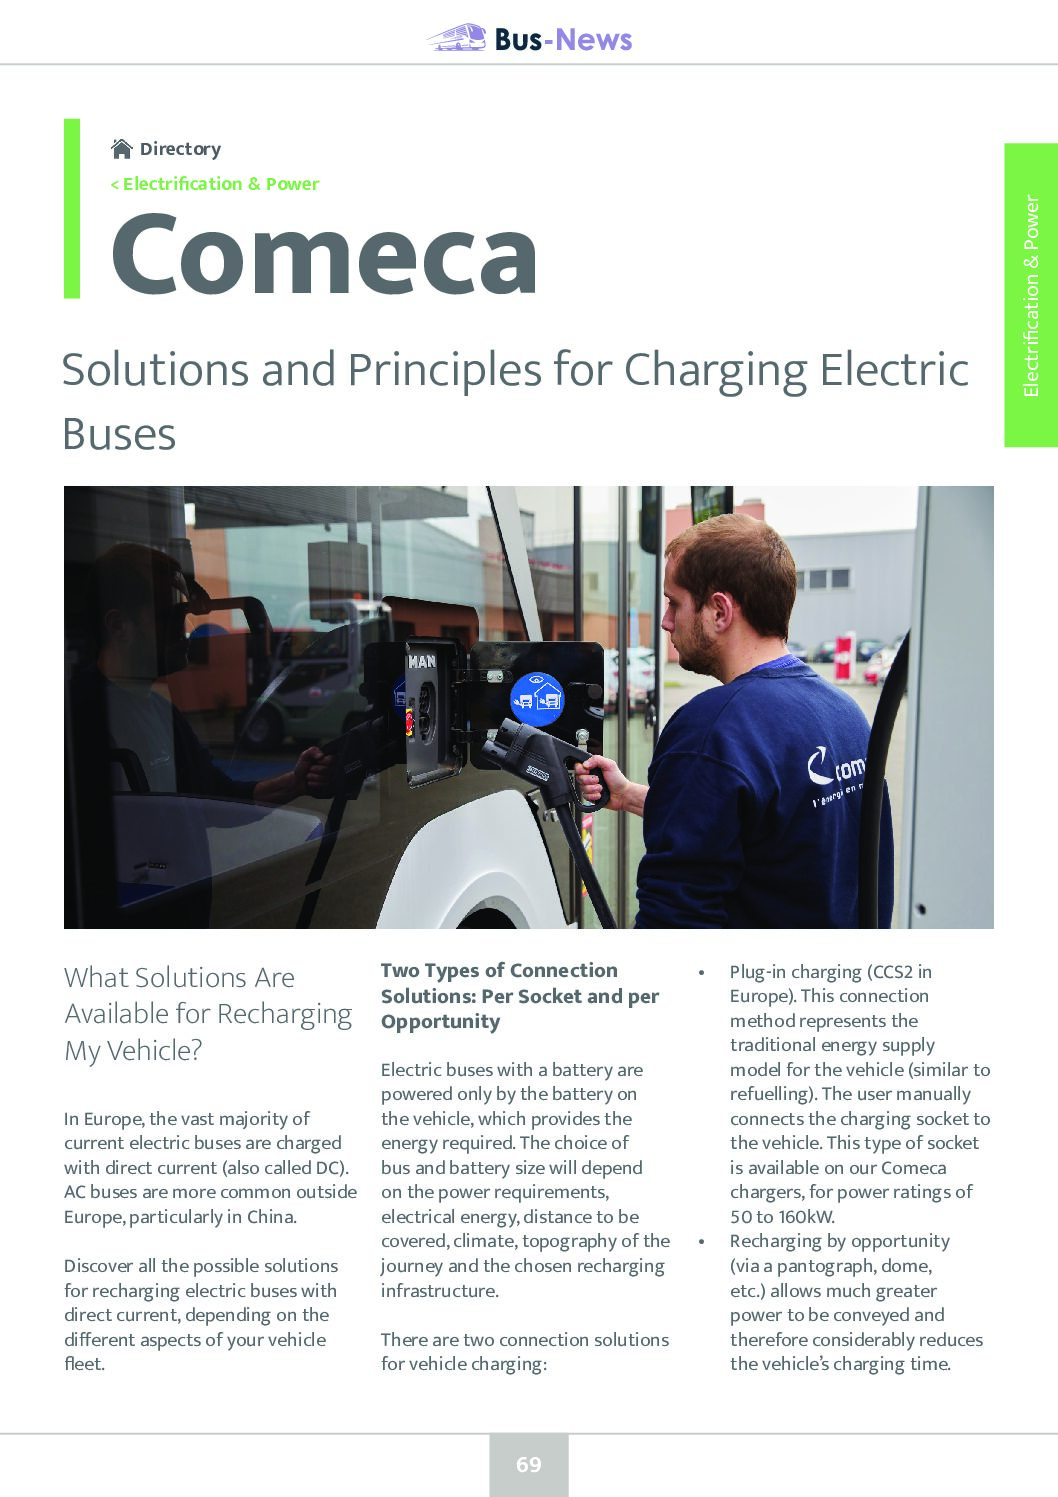 Solutions and Principles for Charging Electric Buses